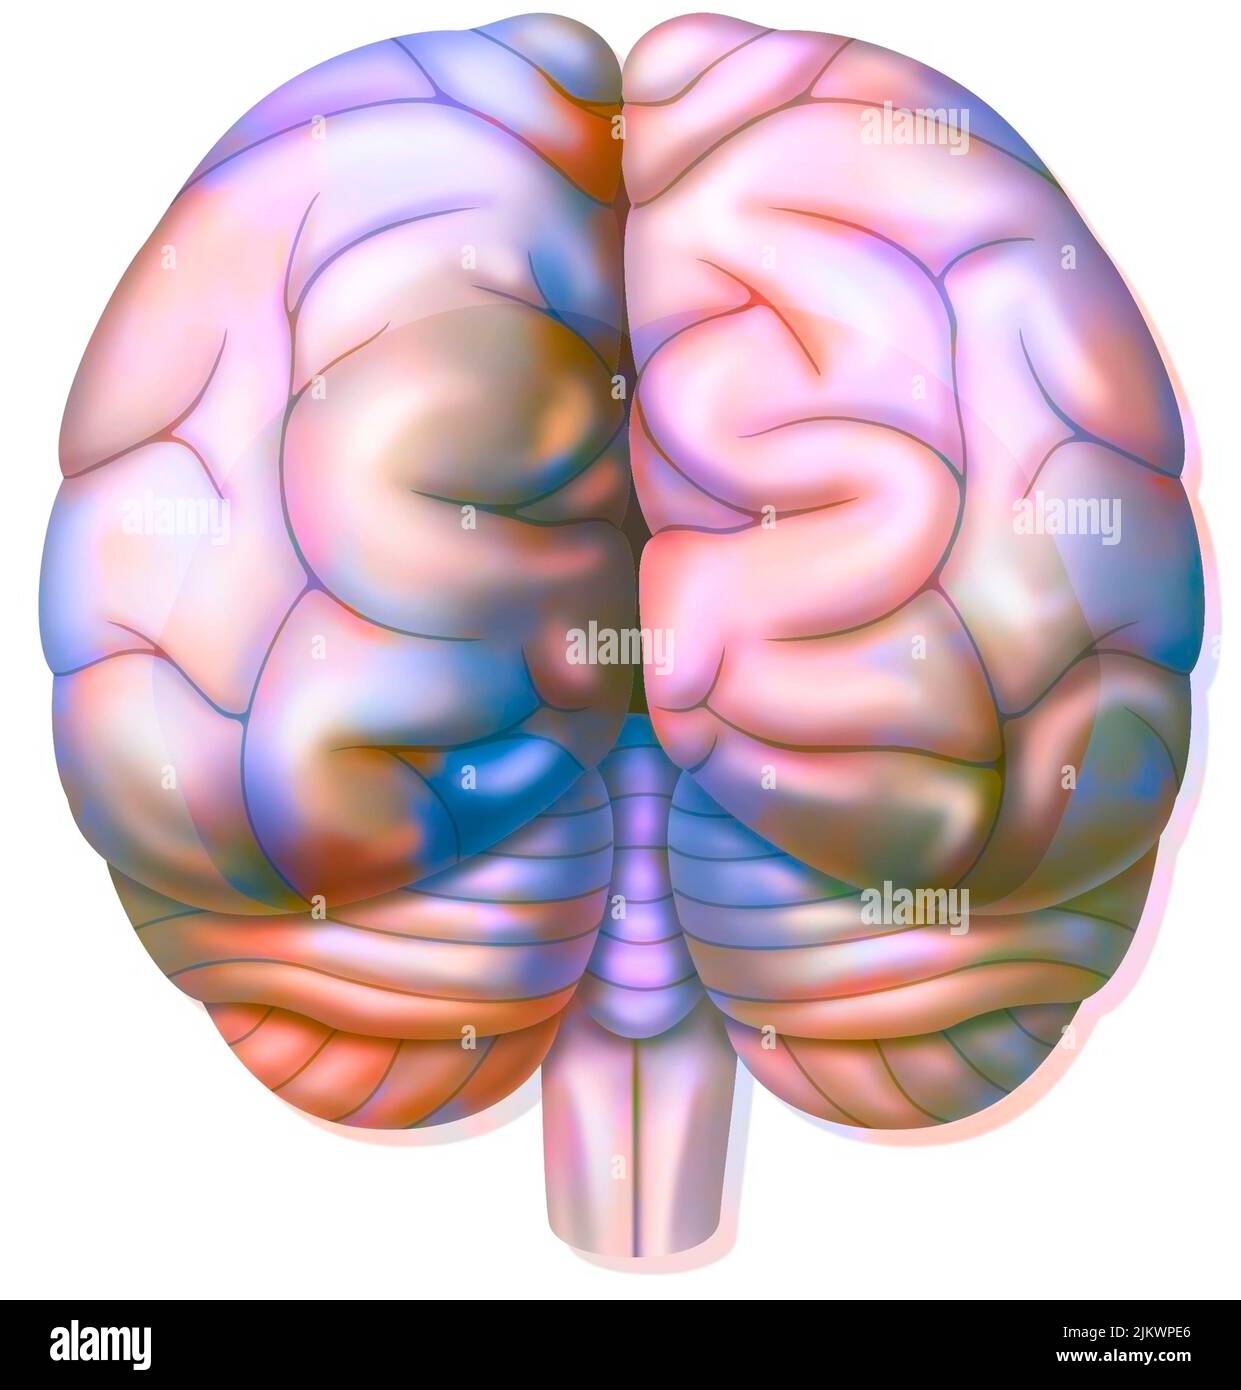 The occipital lobes of the brain in posterior view. Stock Photo